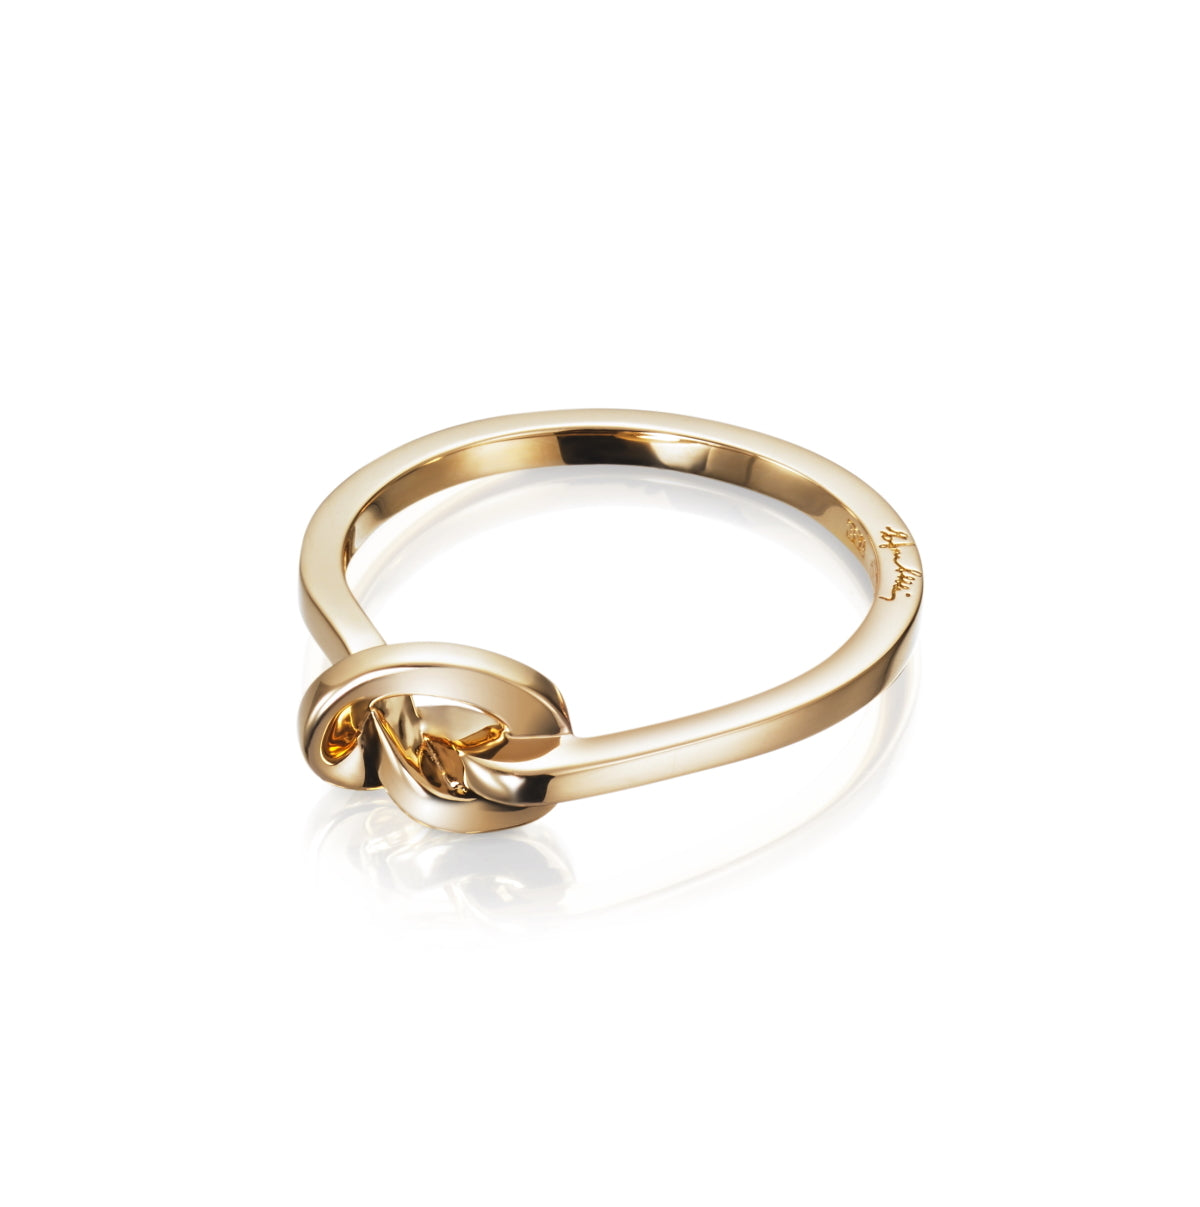 Love Knot Ring Gold